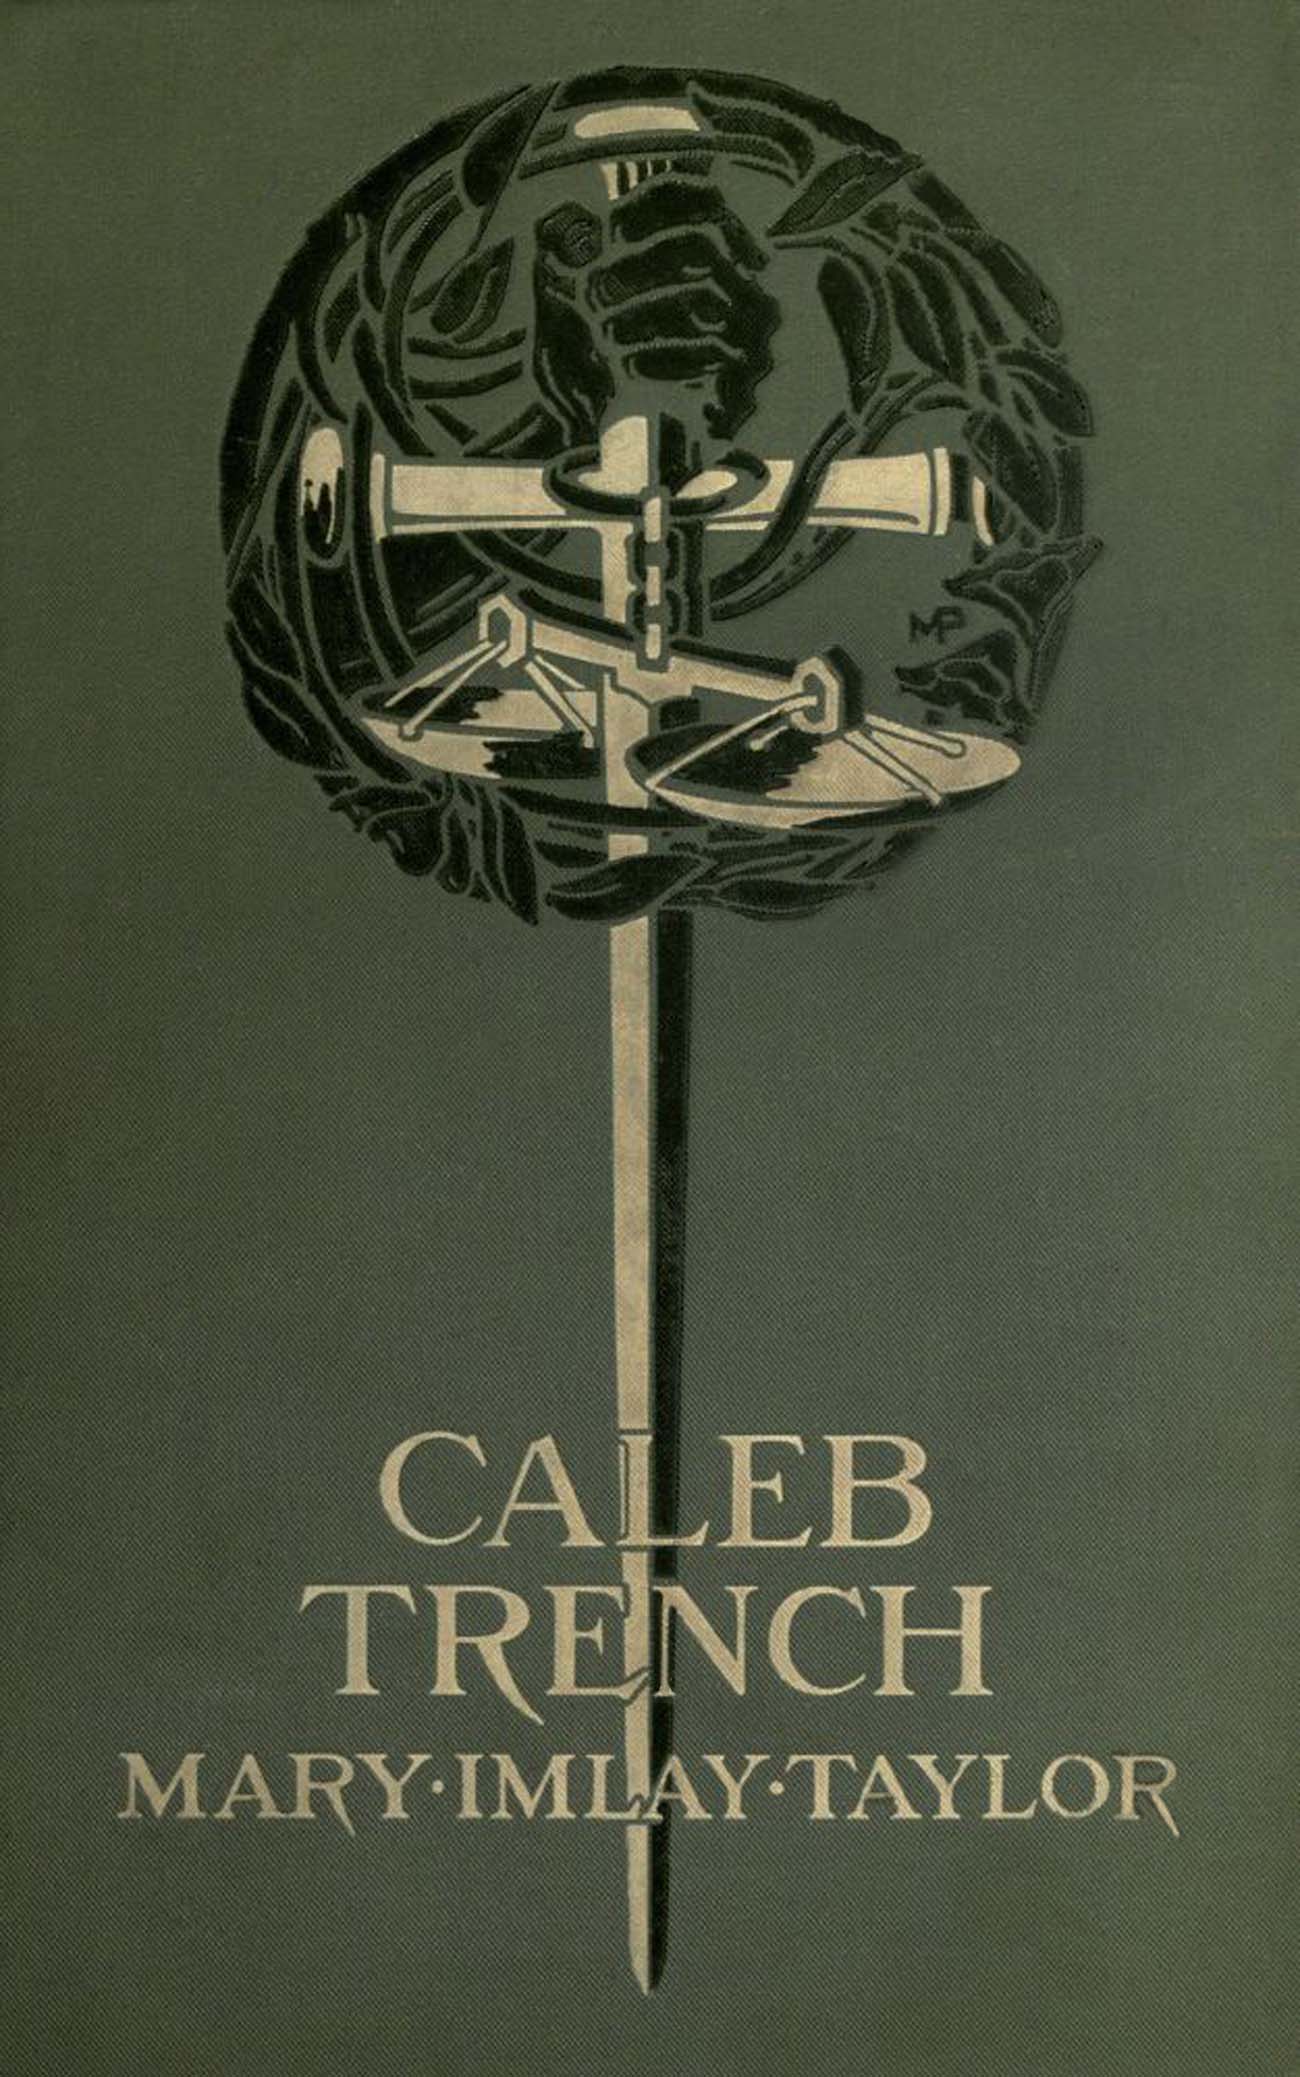 Taylor Swift Triple Penetration Porn - Caleb Trench, by Mary Imlay Taylorâ€”A Project Gutenberg eBook